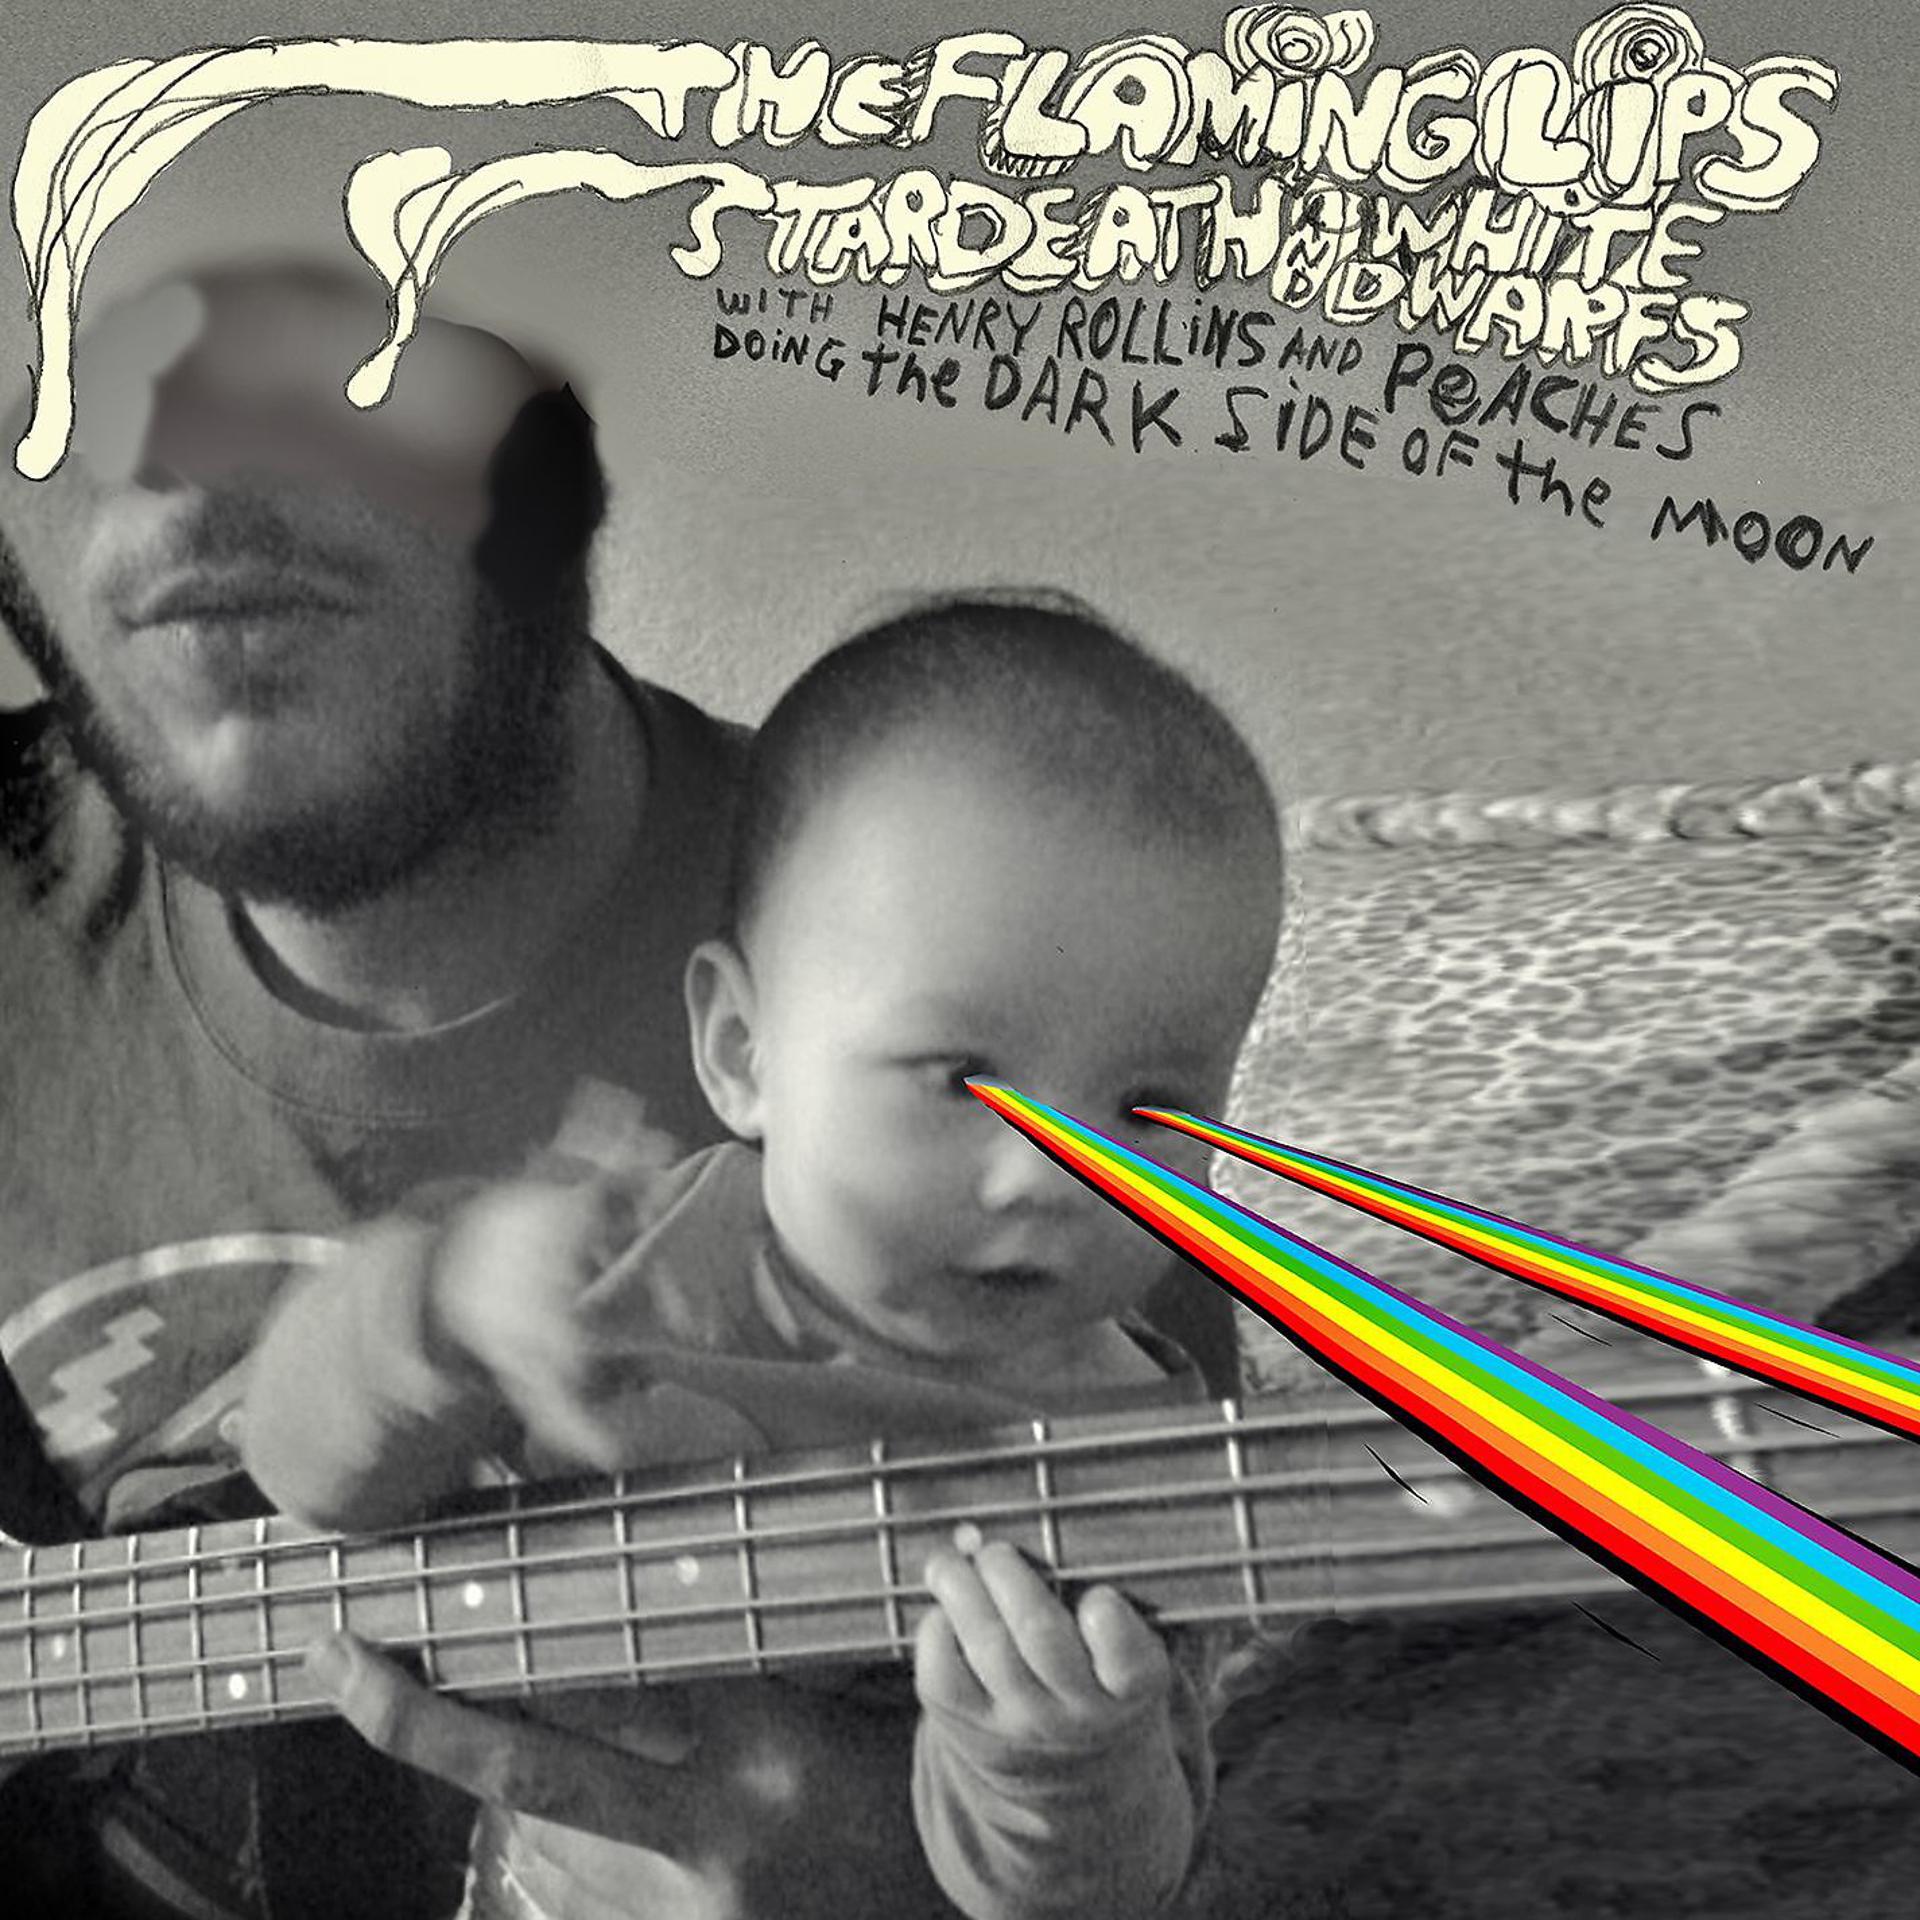 Постер альбома The Flaming Lips And Stardeath And White Dwarfs With Henry Rollins And Peaches Doing Dark Side Of The Moon